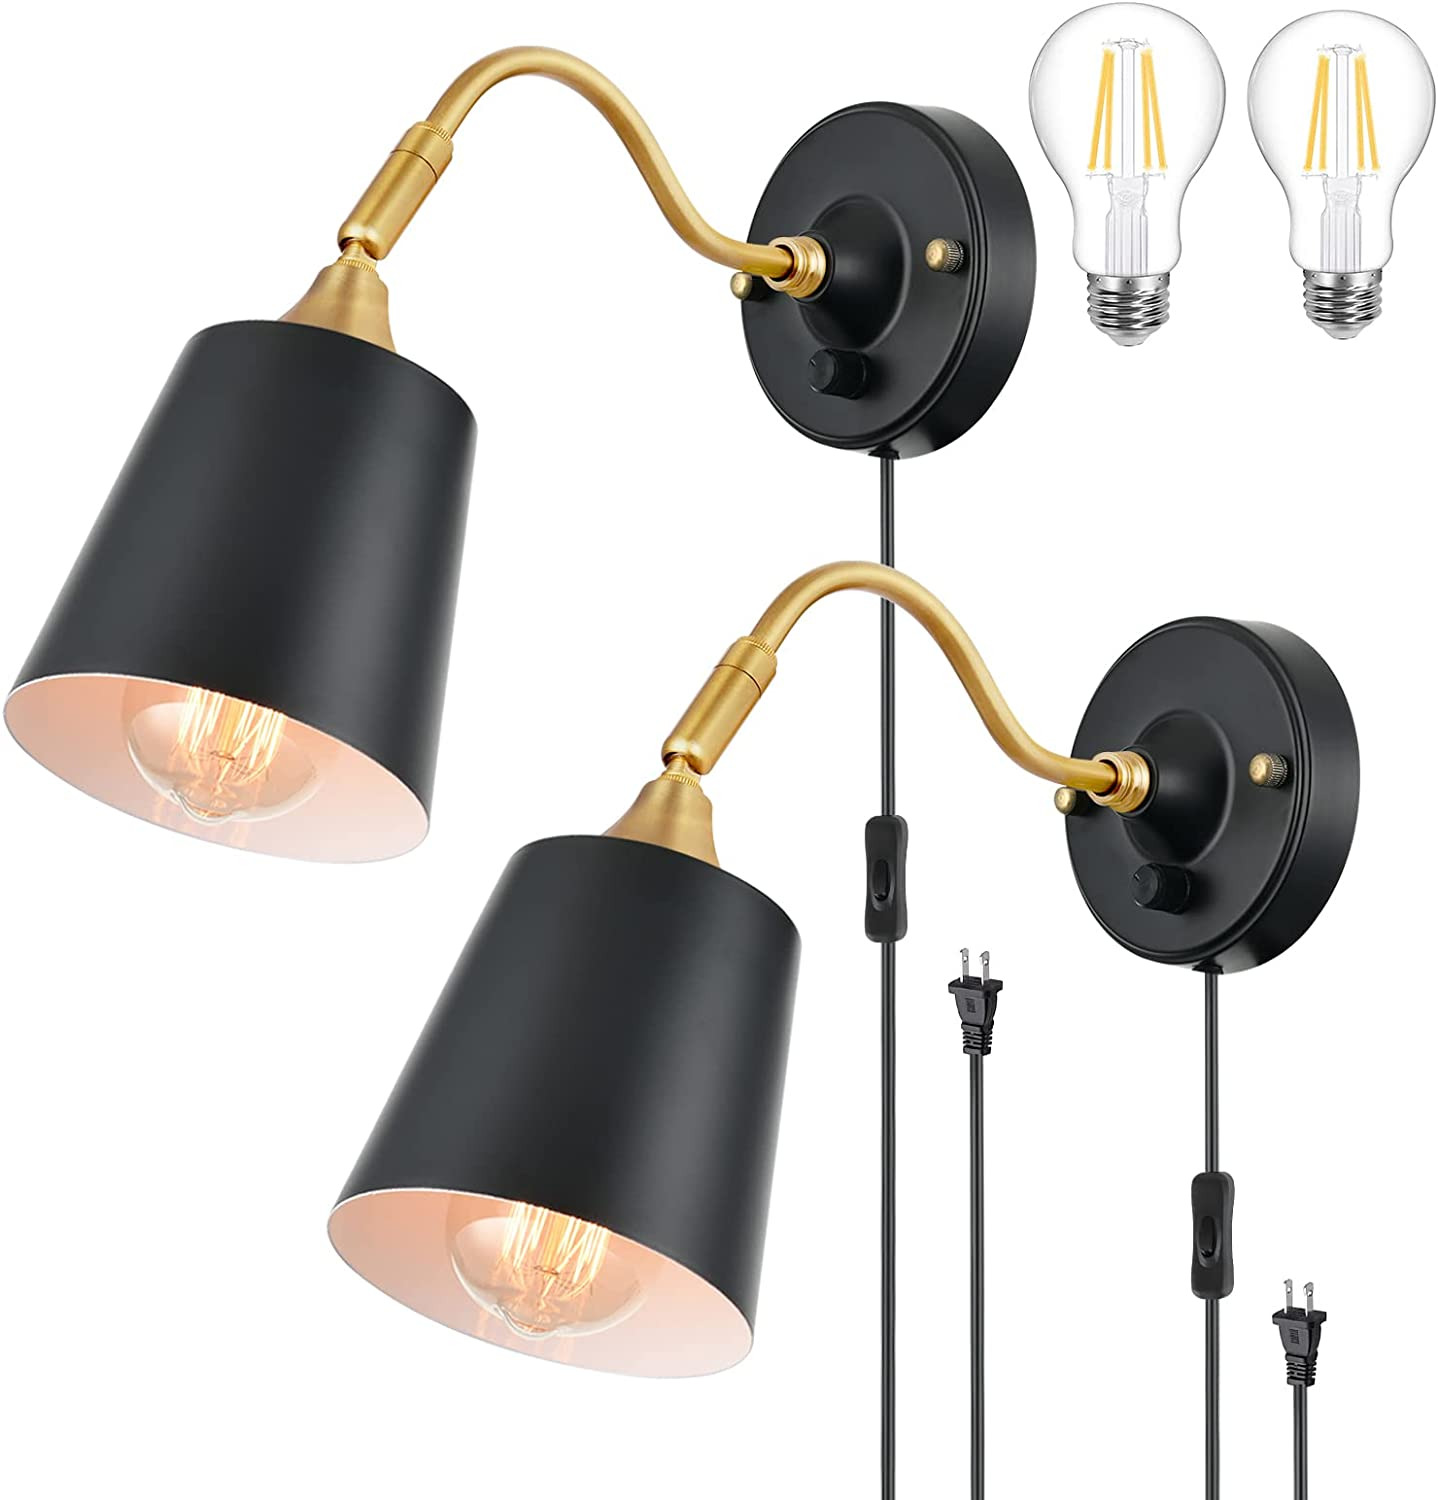 Wall Sconces Plug In, Dimmable Wall Lights with Plug in Cord Adjustable Lighting